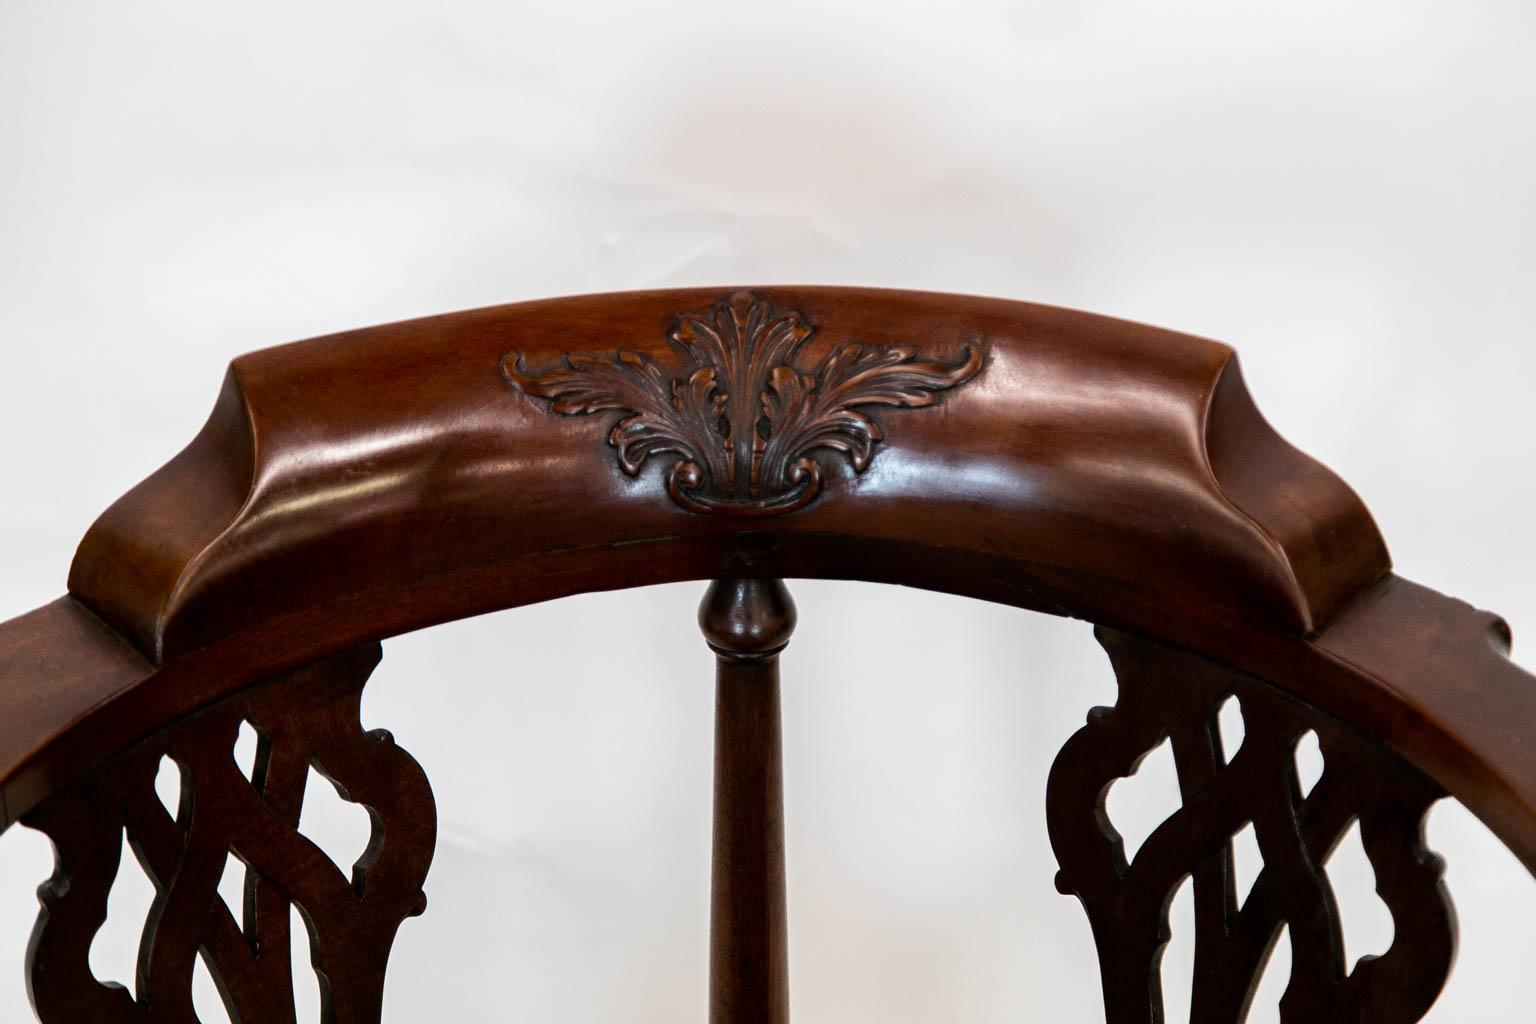 The scrolled arms of this corner chair are carved with arabesque leaves. The back crest rail is carved with a floral design in high relief. The back splats are pierced and have interlaced carving. The cabriole legs are carved with scallop shells on